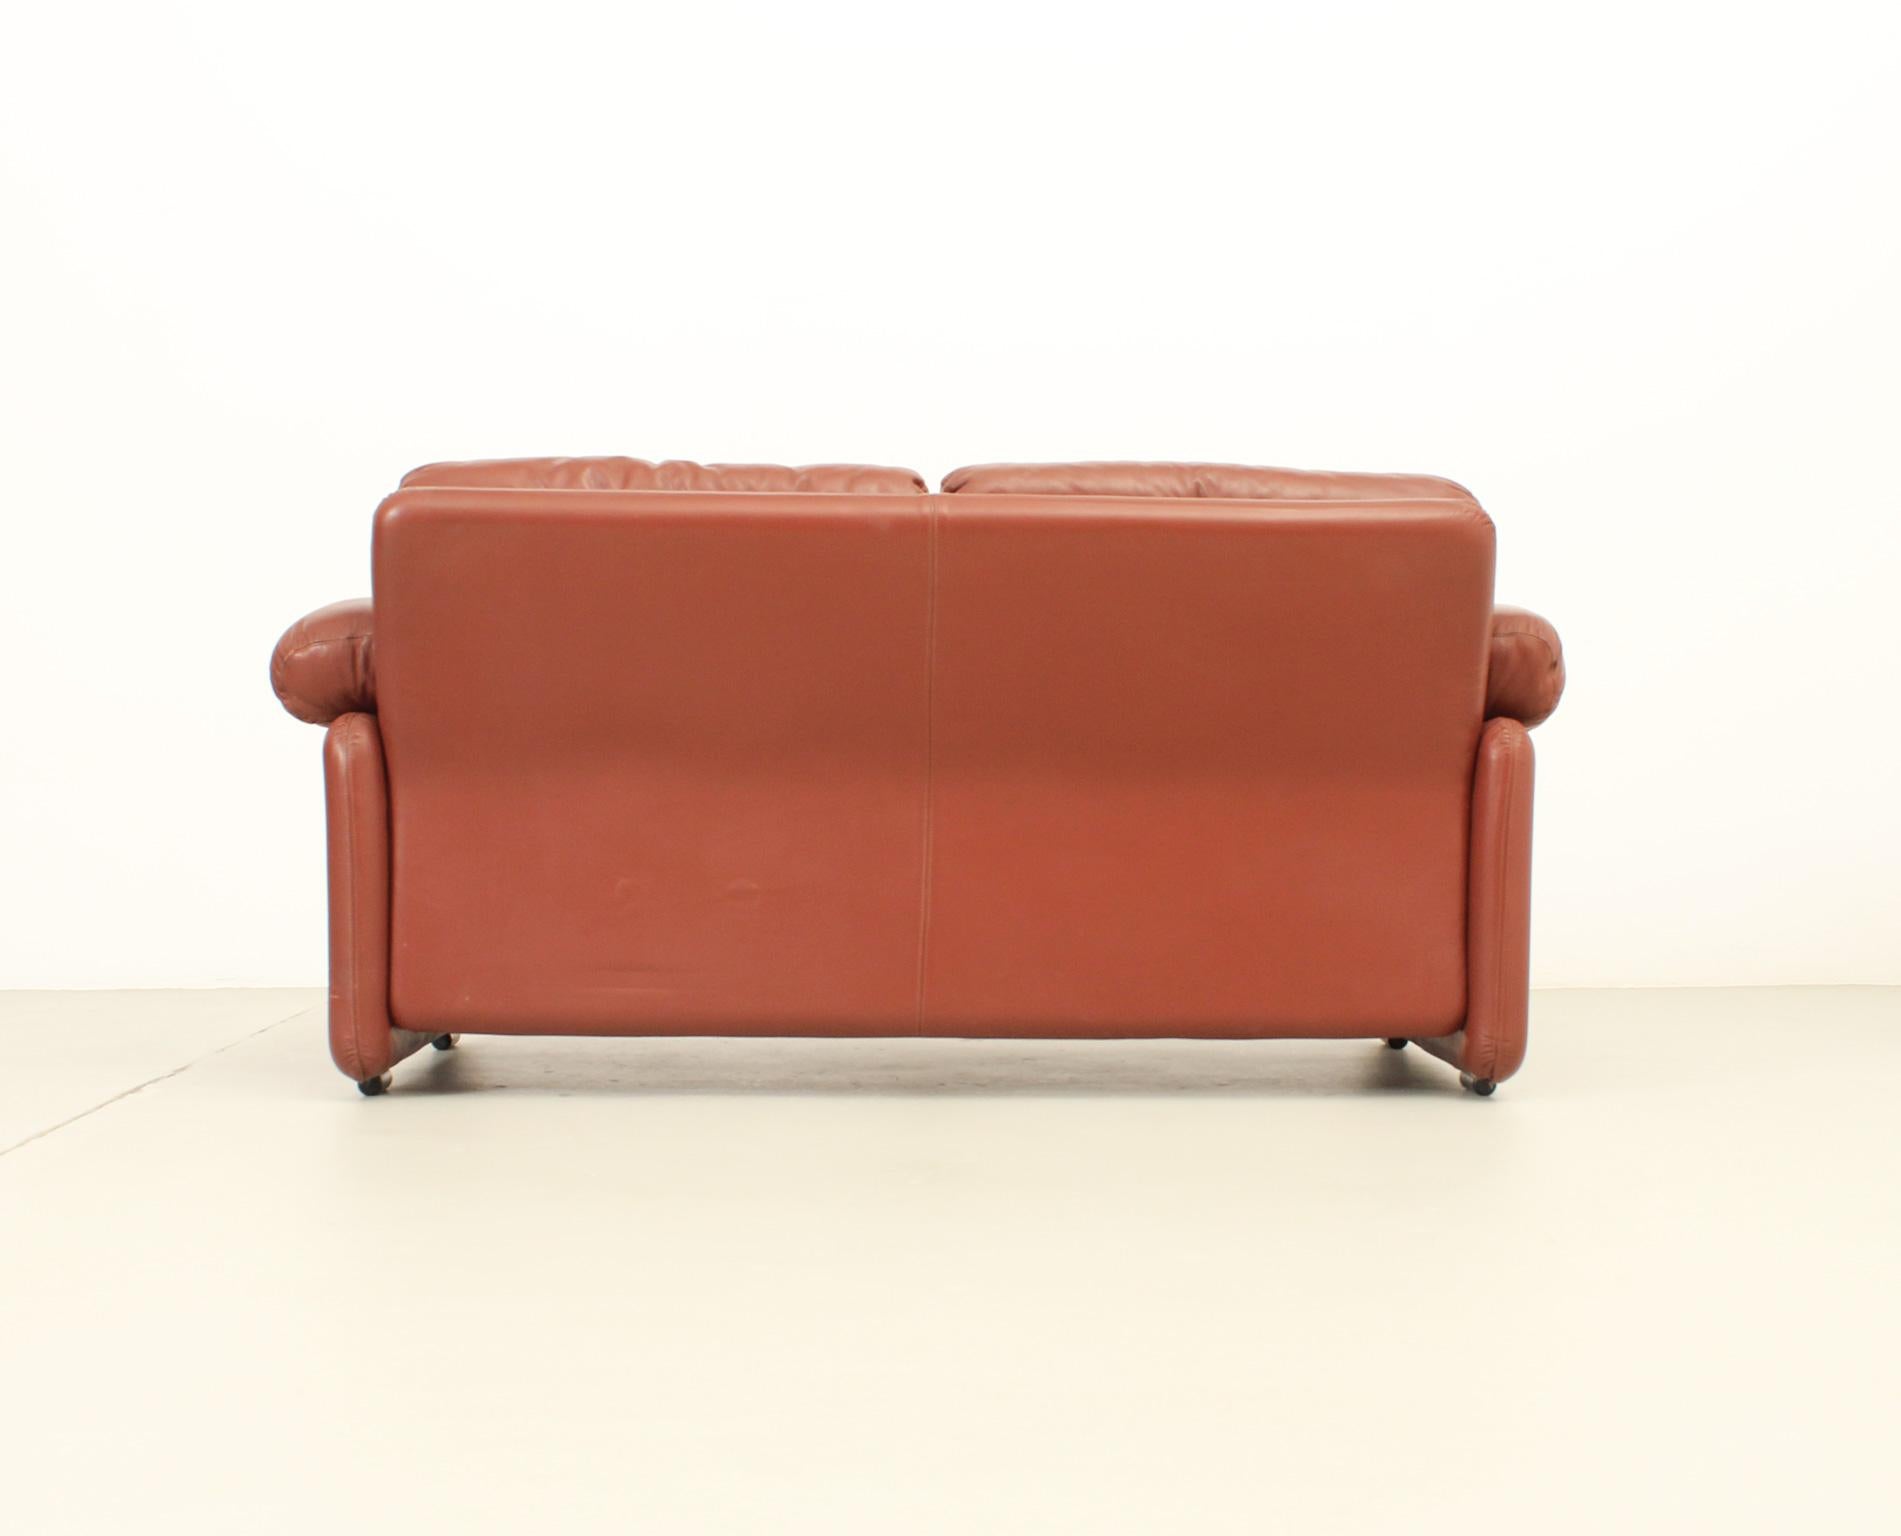 Coronado Two-seater Sofa by Tobia Scarpa in Cognac Leather, 1969 For Sale 5